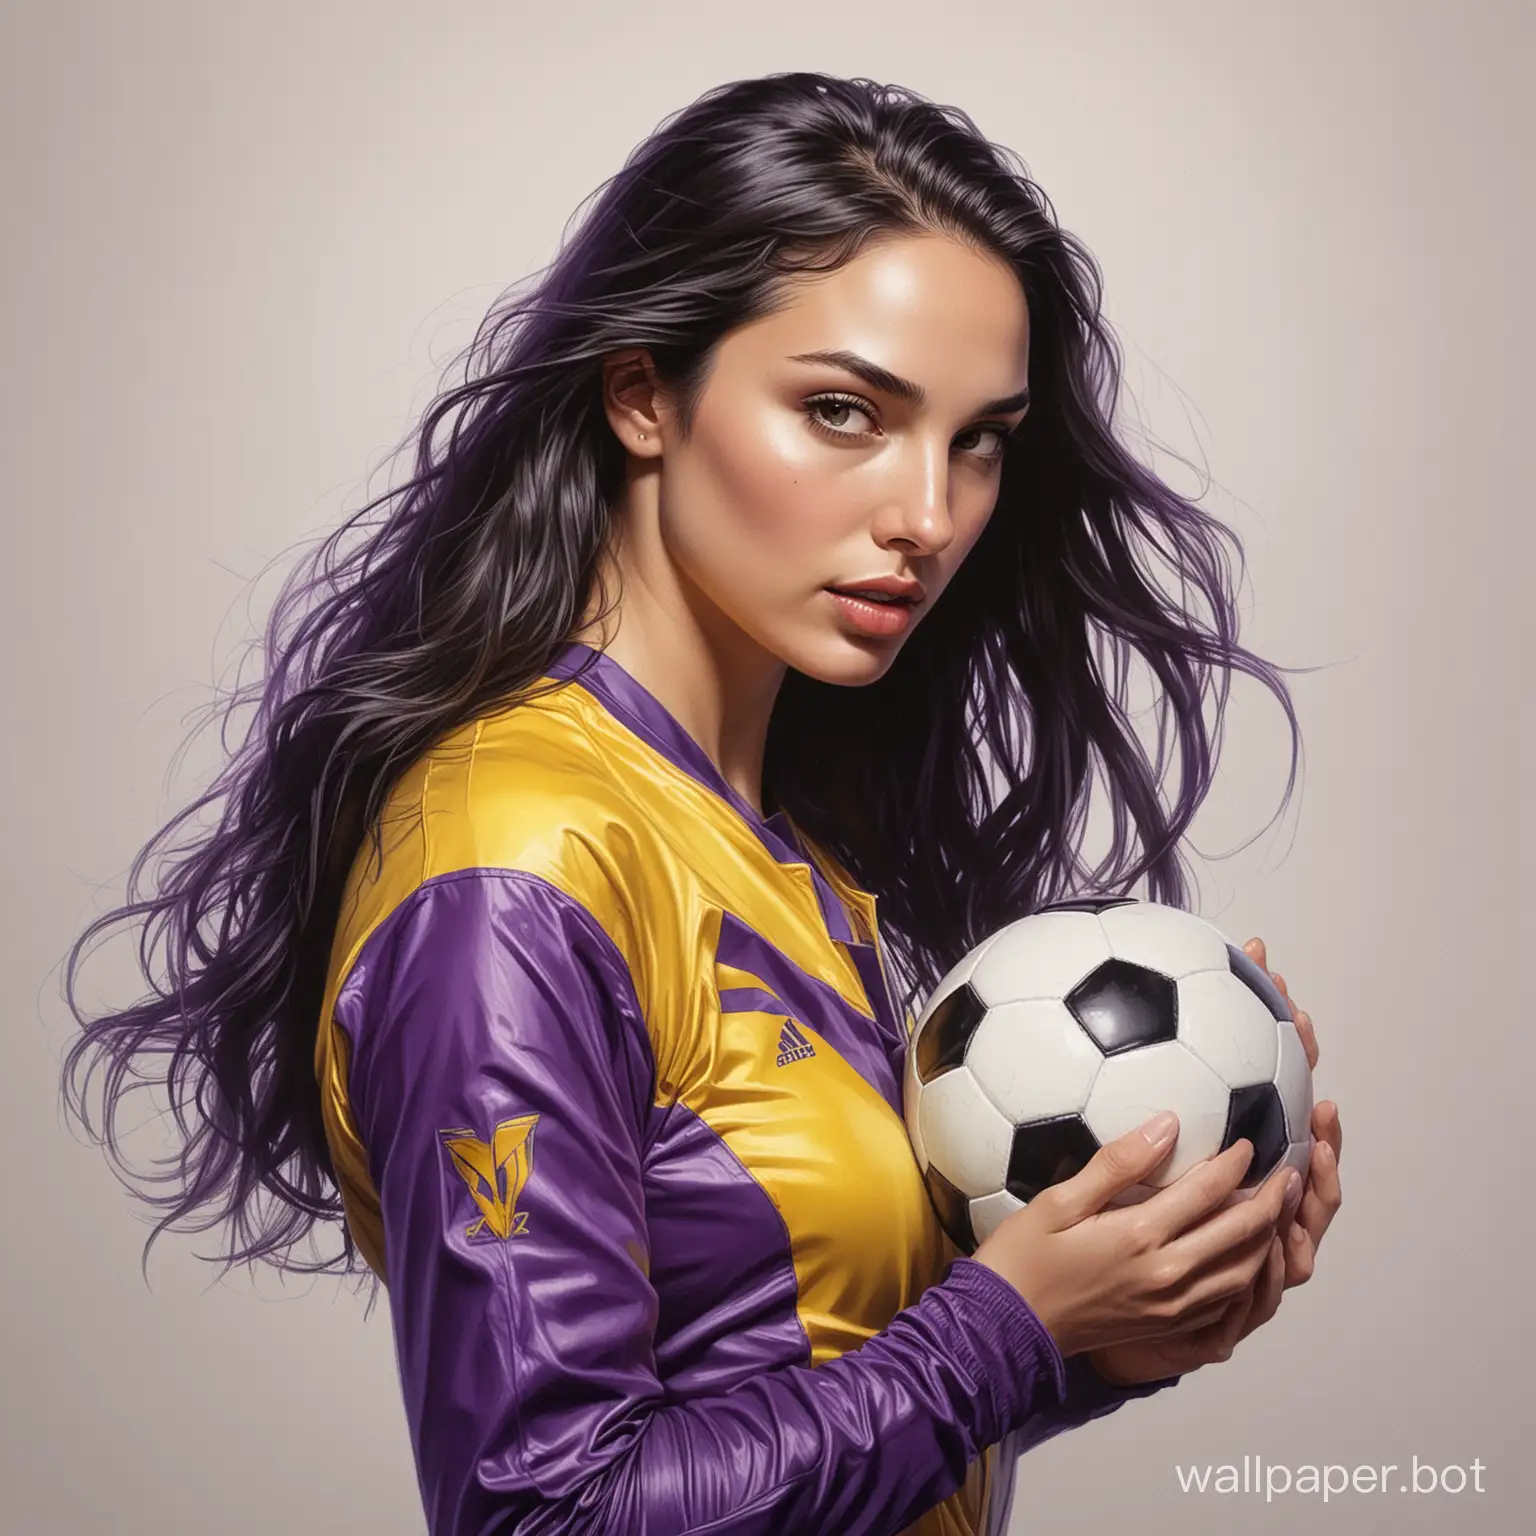 Portrait-Sketch-of-Young-Gal-Gadot-with-Long-Black-Hair-and-Soccer-Uniform